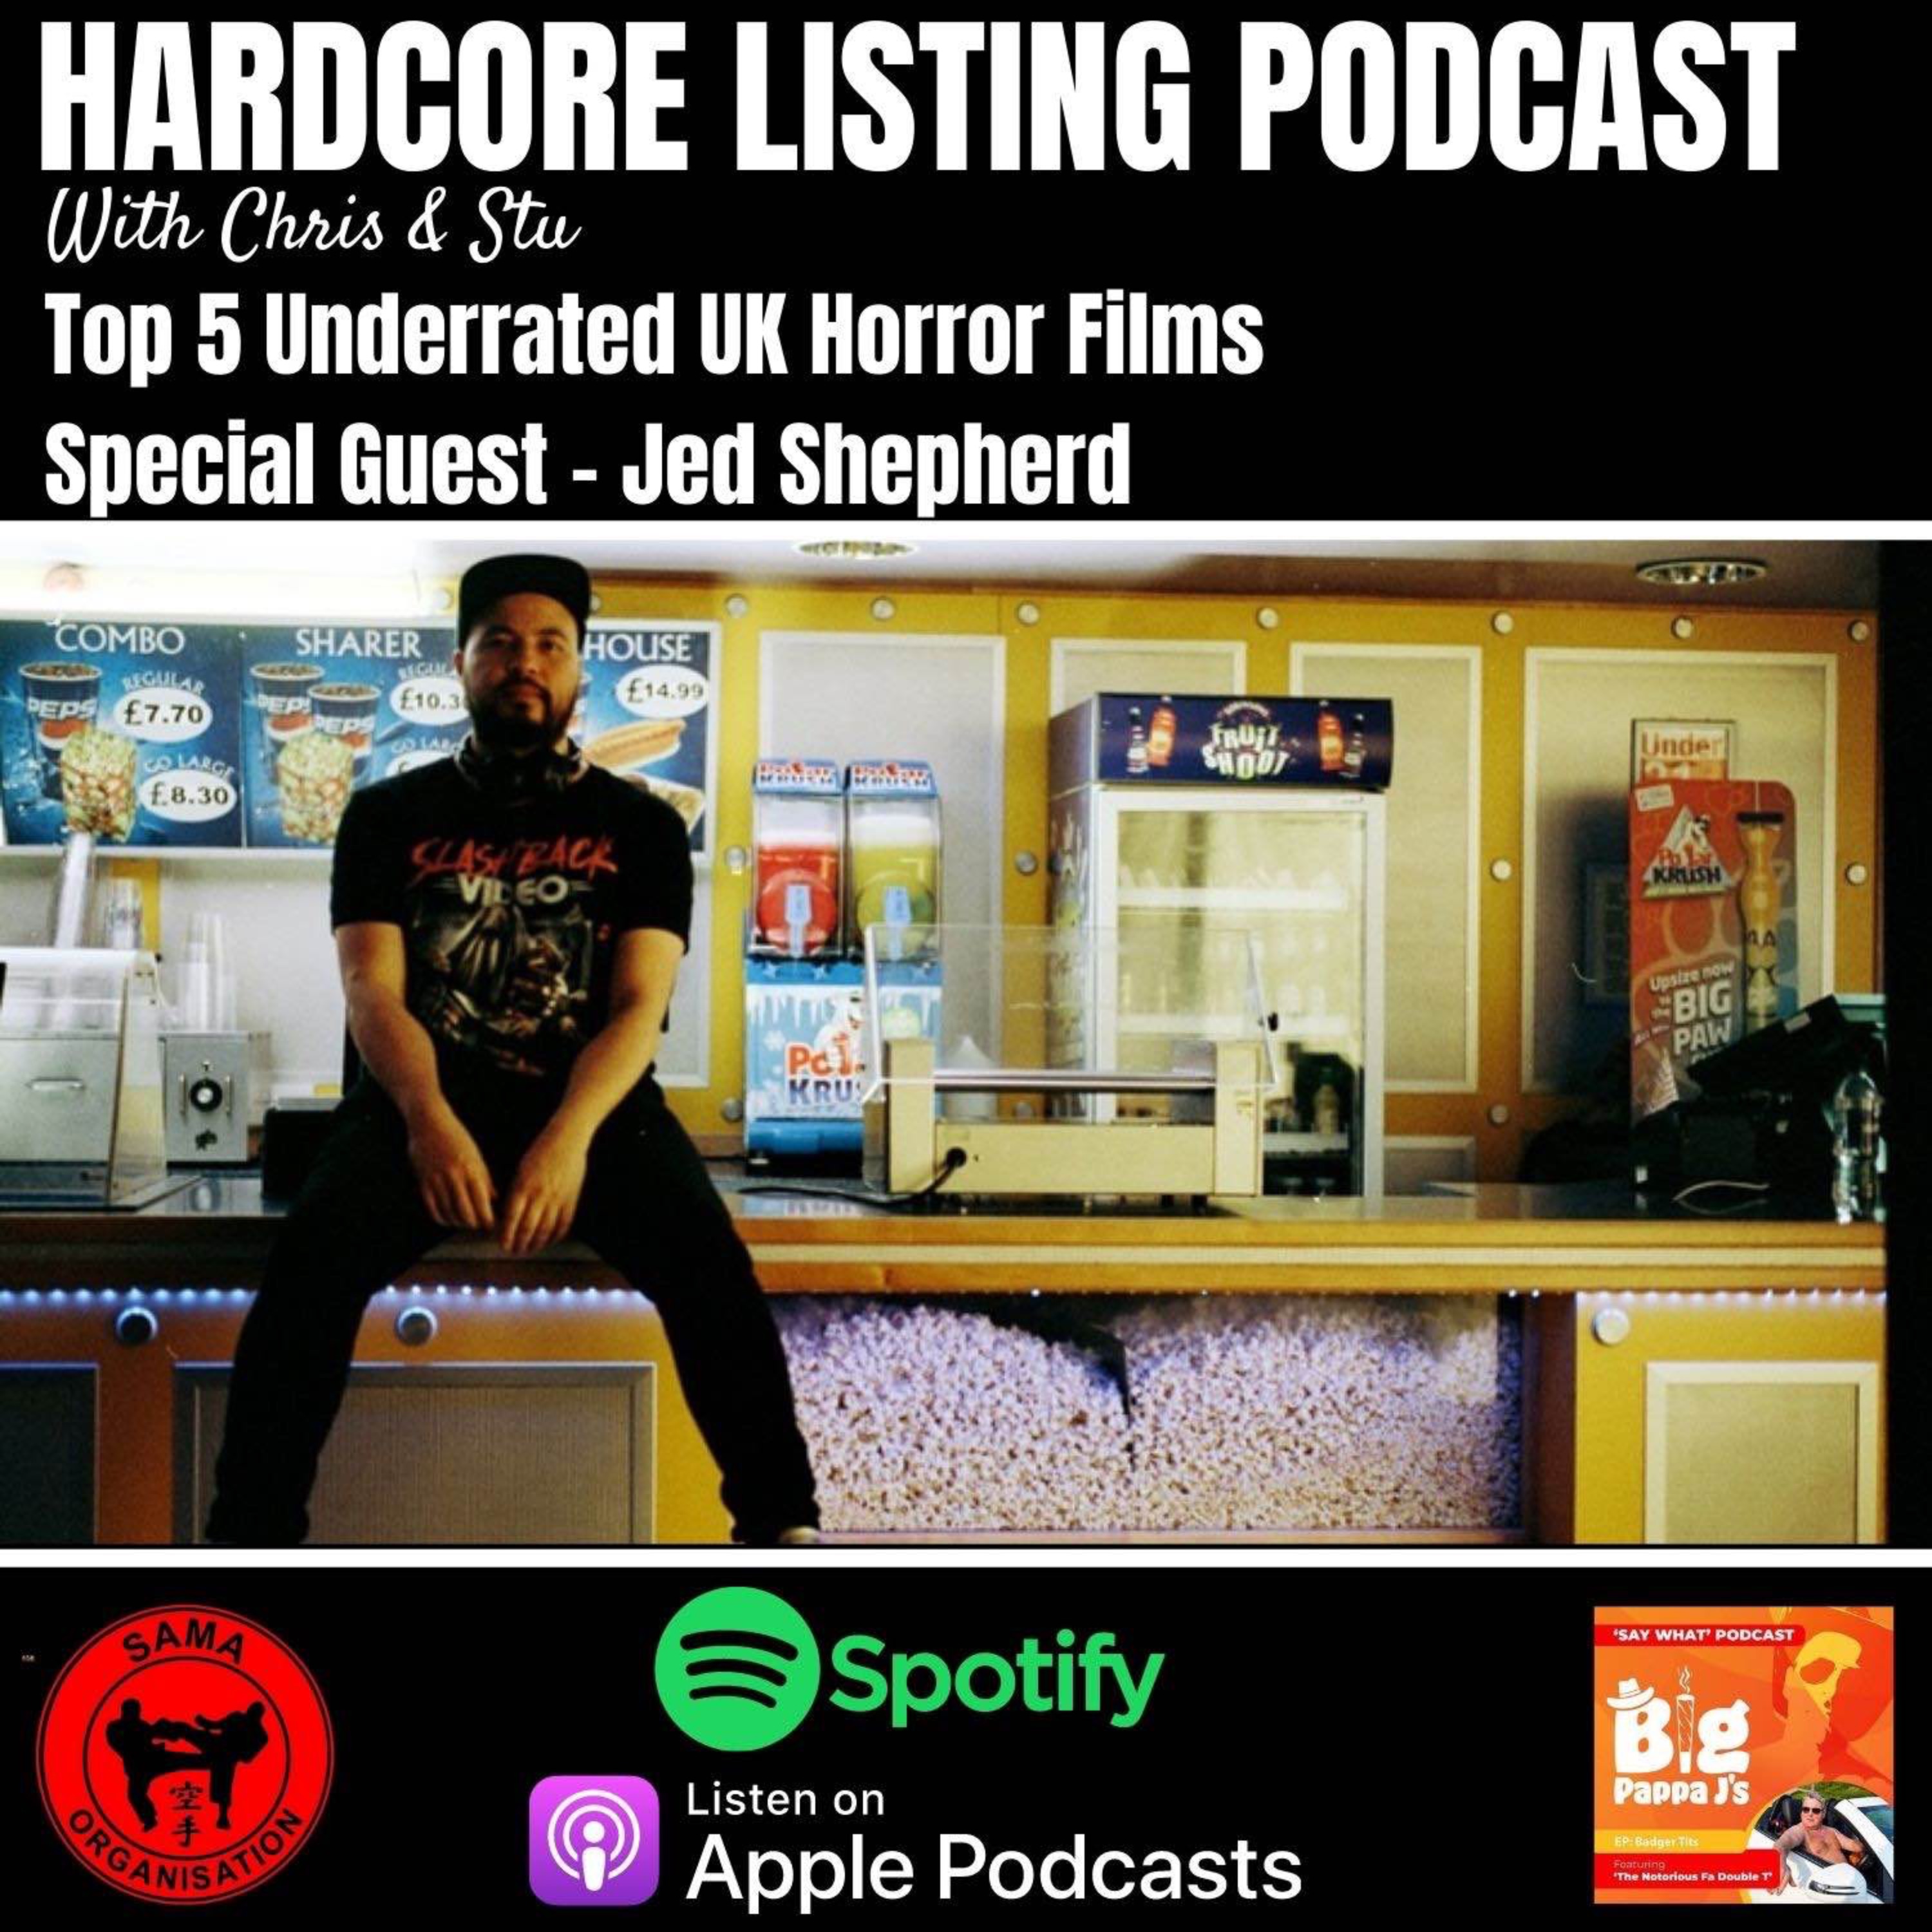 Top 5 Underrated UK Horror Films with Jed Shepherd